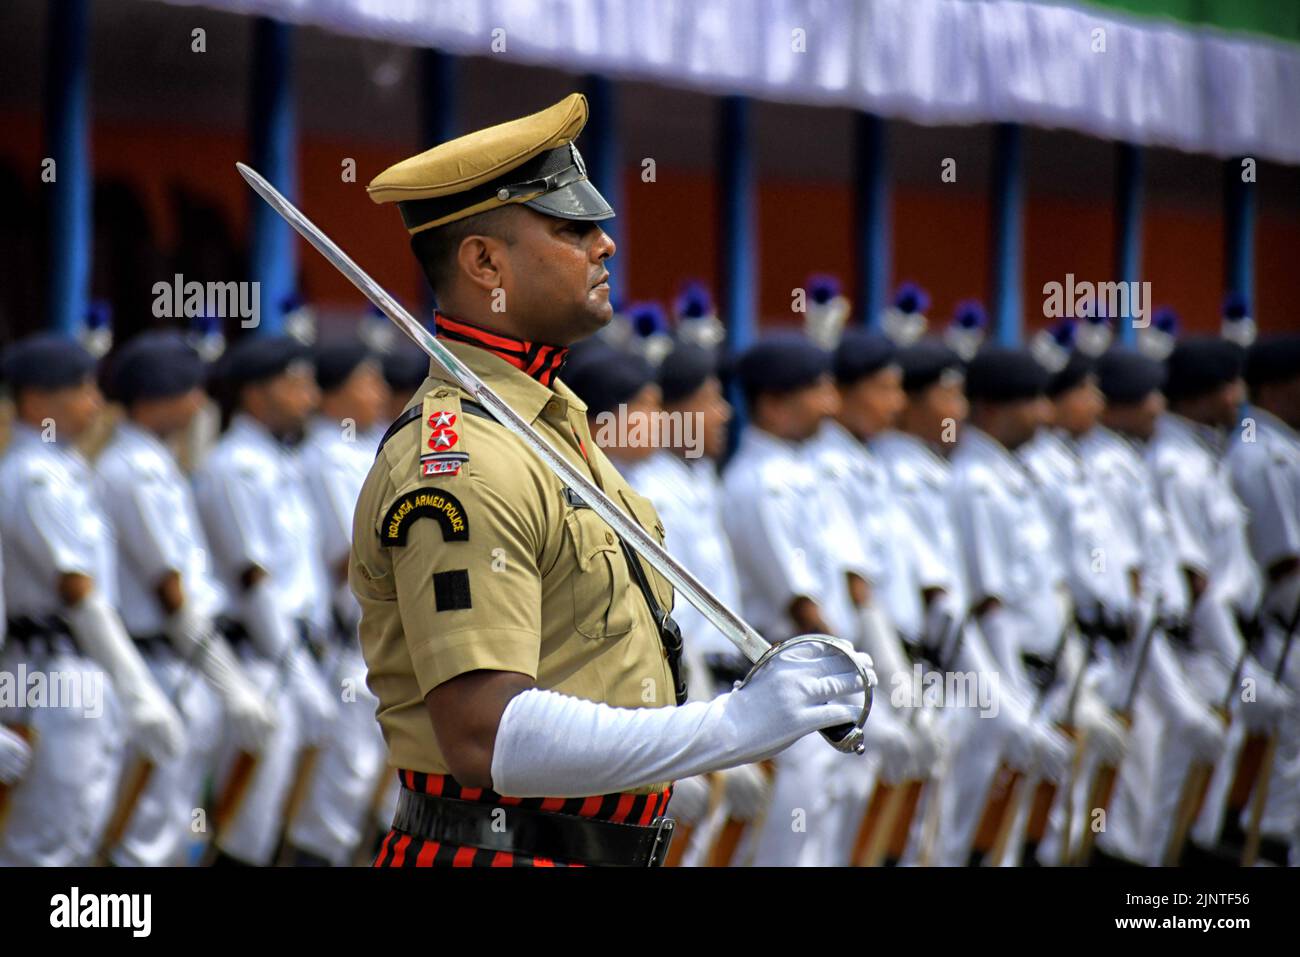 Officers of Kolkata Police stand in a queue for inspection during the Final Dress rehearsal during the Independence day Final Dress Rehearsal. India prepares to celebrate the 75th Independence day on 15th August 2022 as part of the Azadi Ka Amrit Mahotsav celebration. Stock Photo